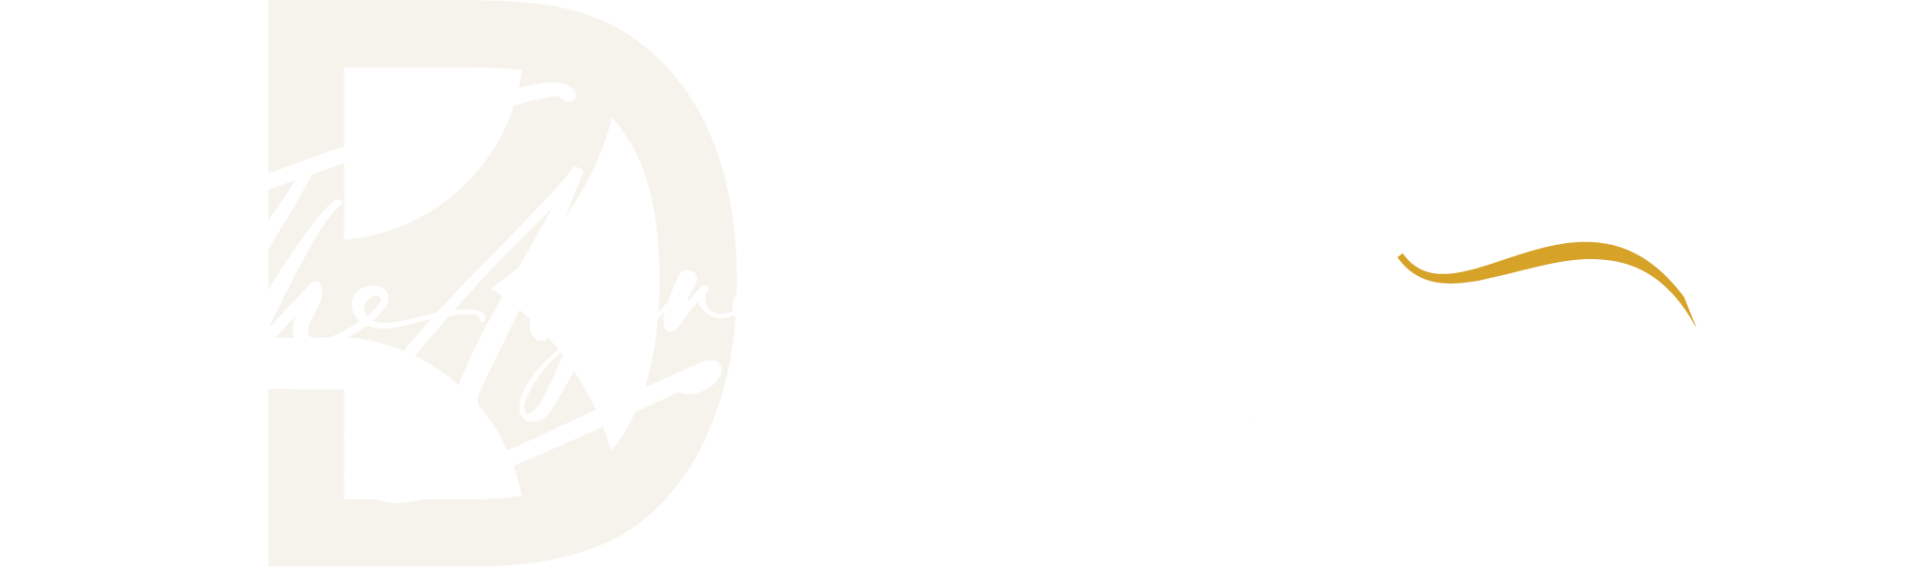 The Agency Legal Document Professionals